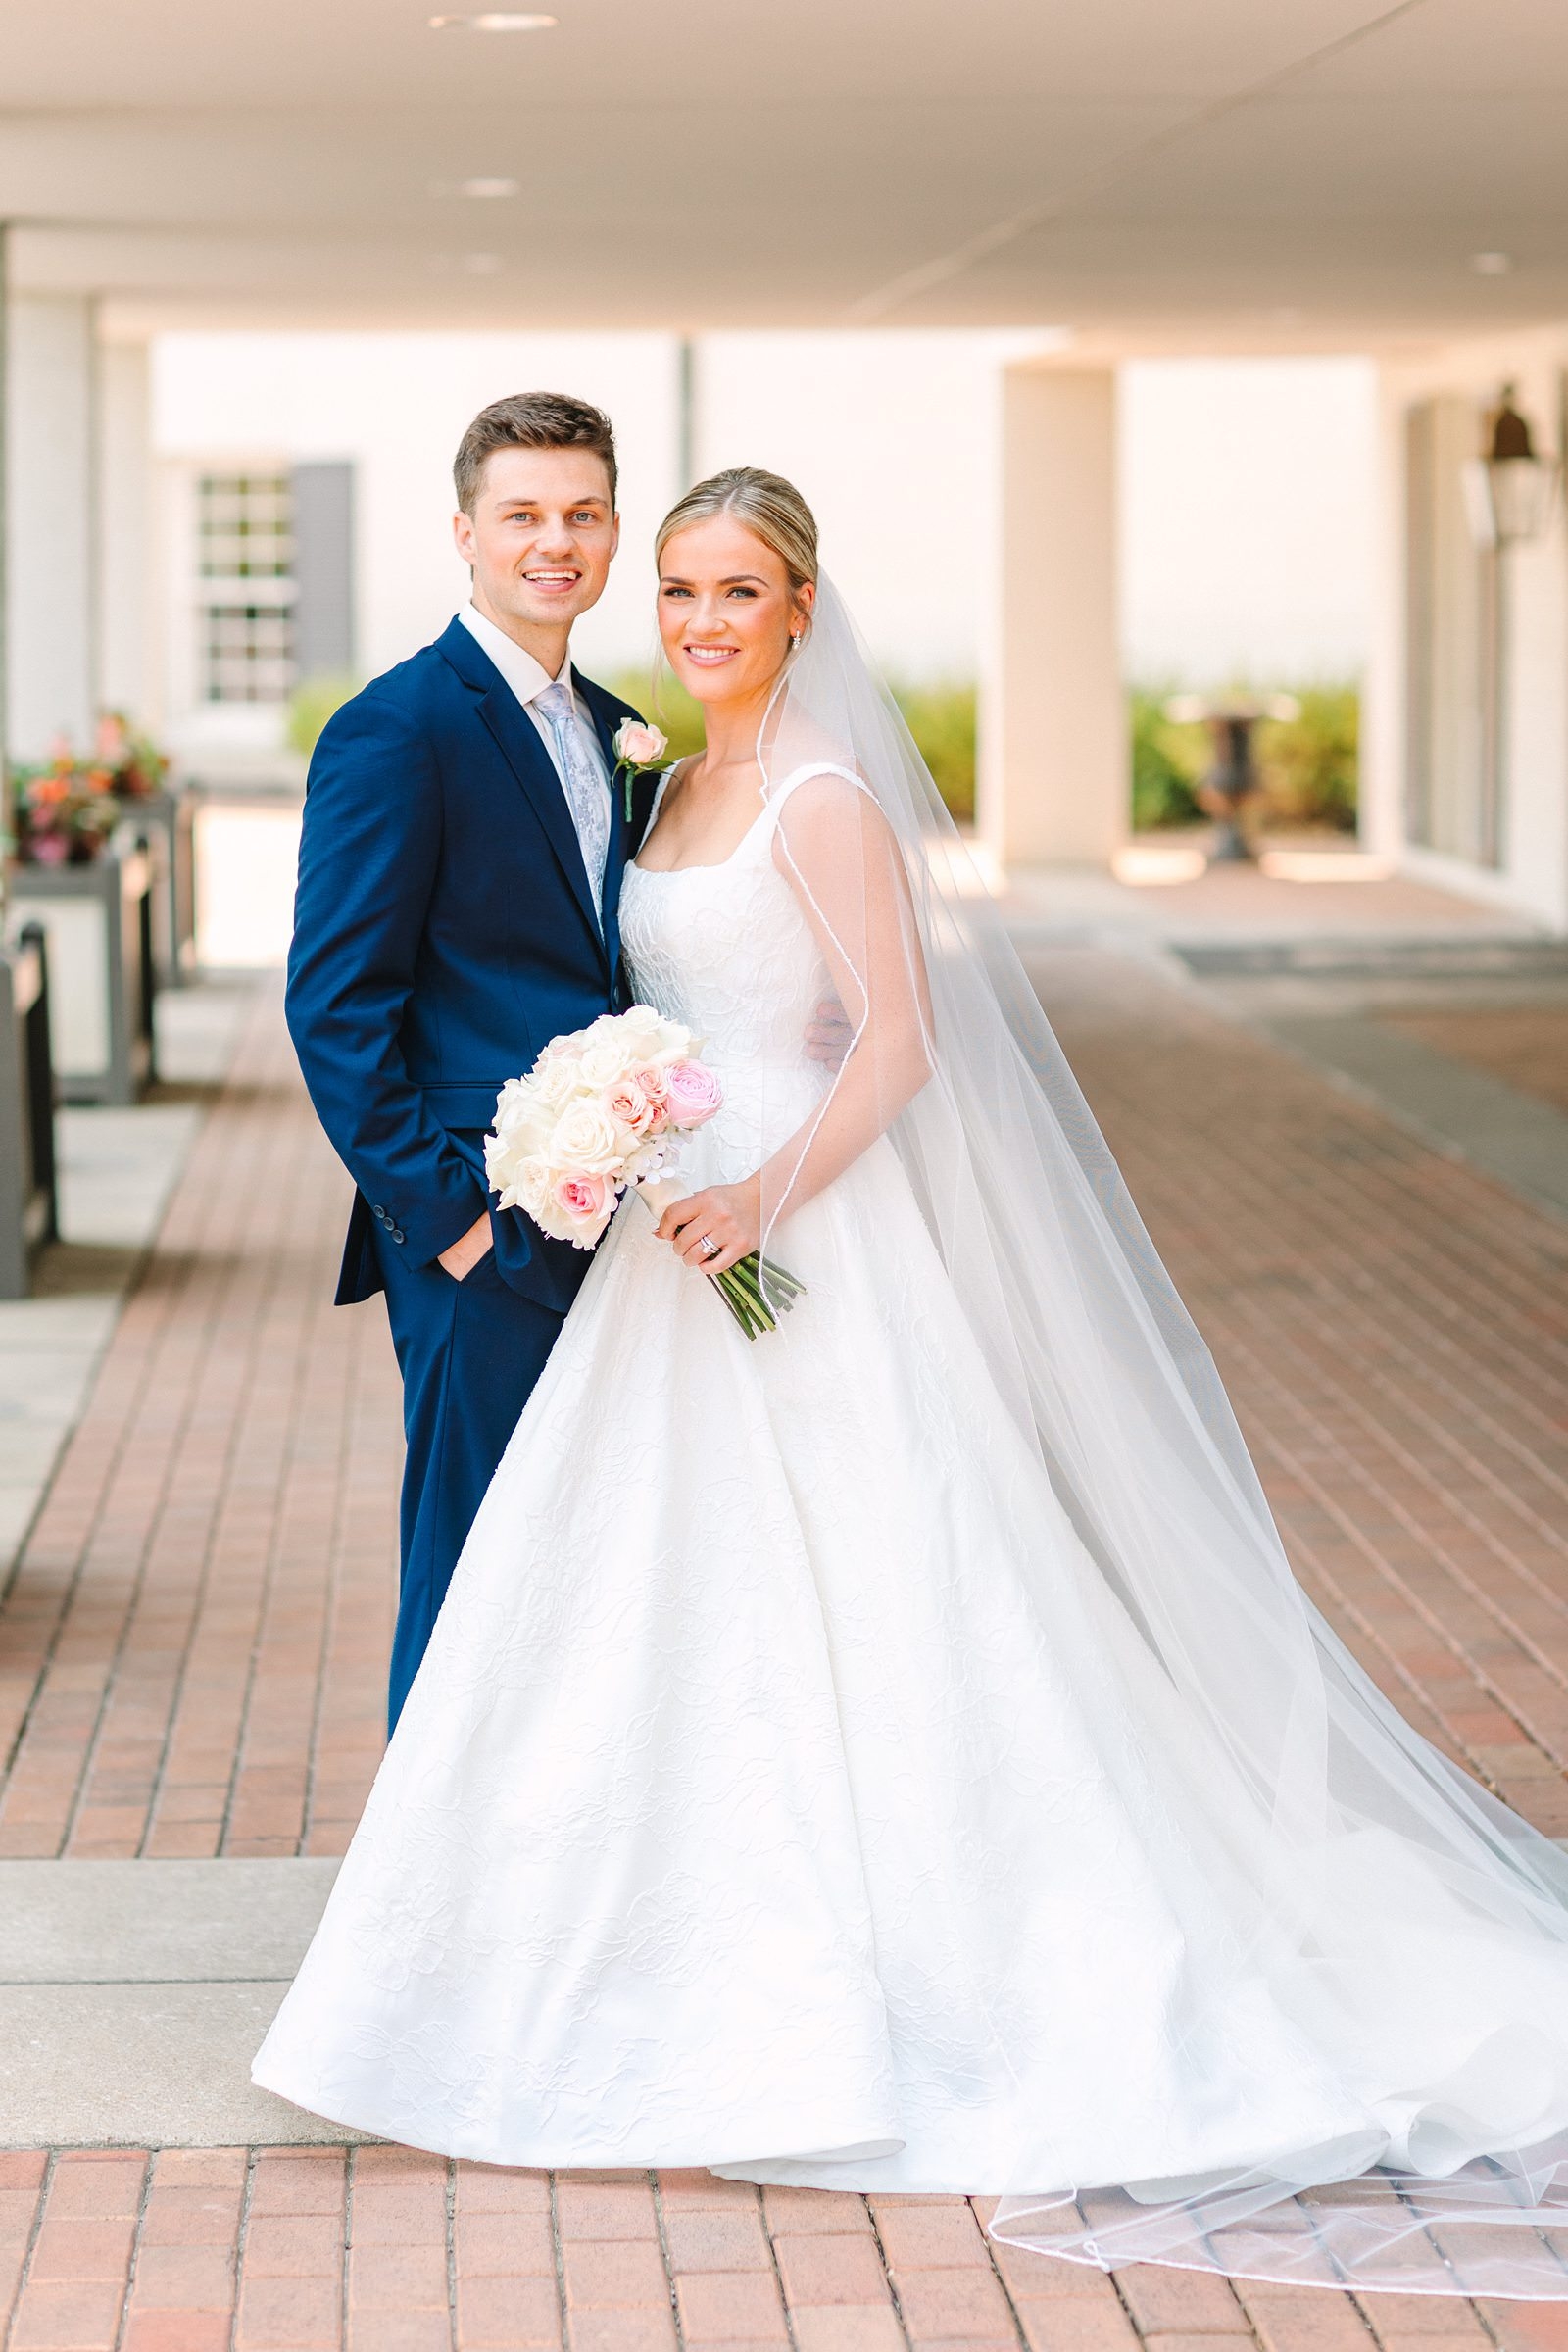 An Evansville Country Club Wedding | Ashley and Beau | Bret and Brandie Photography093.jpg